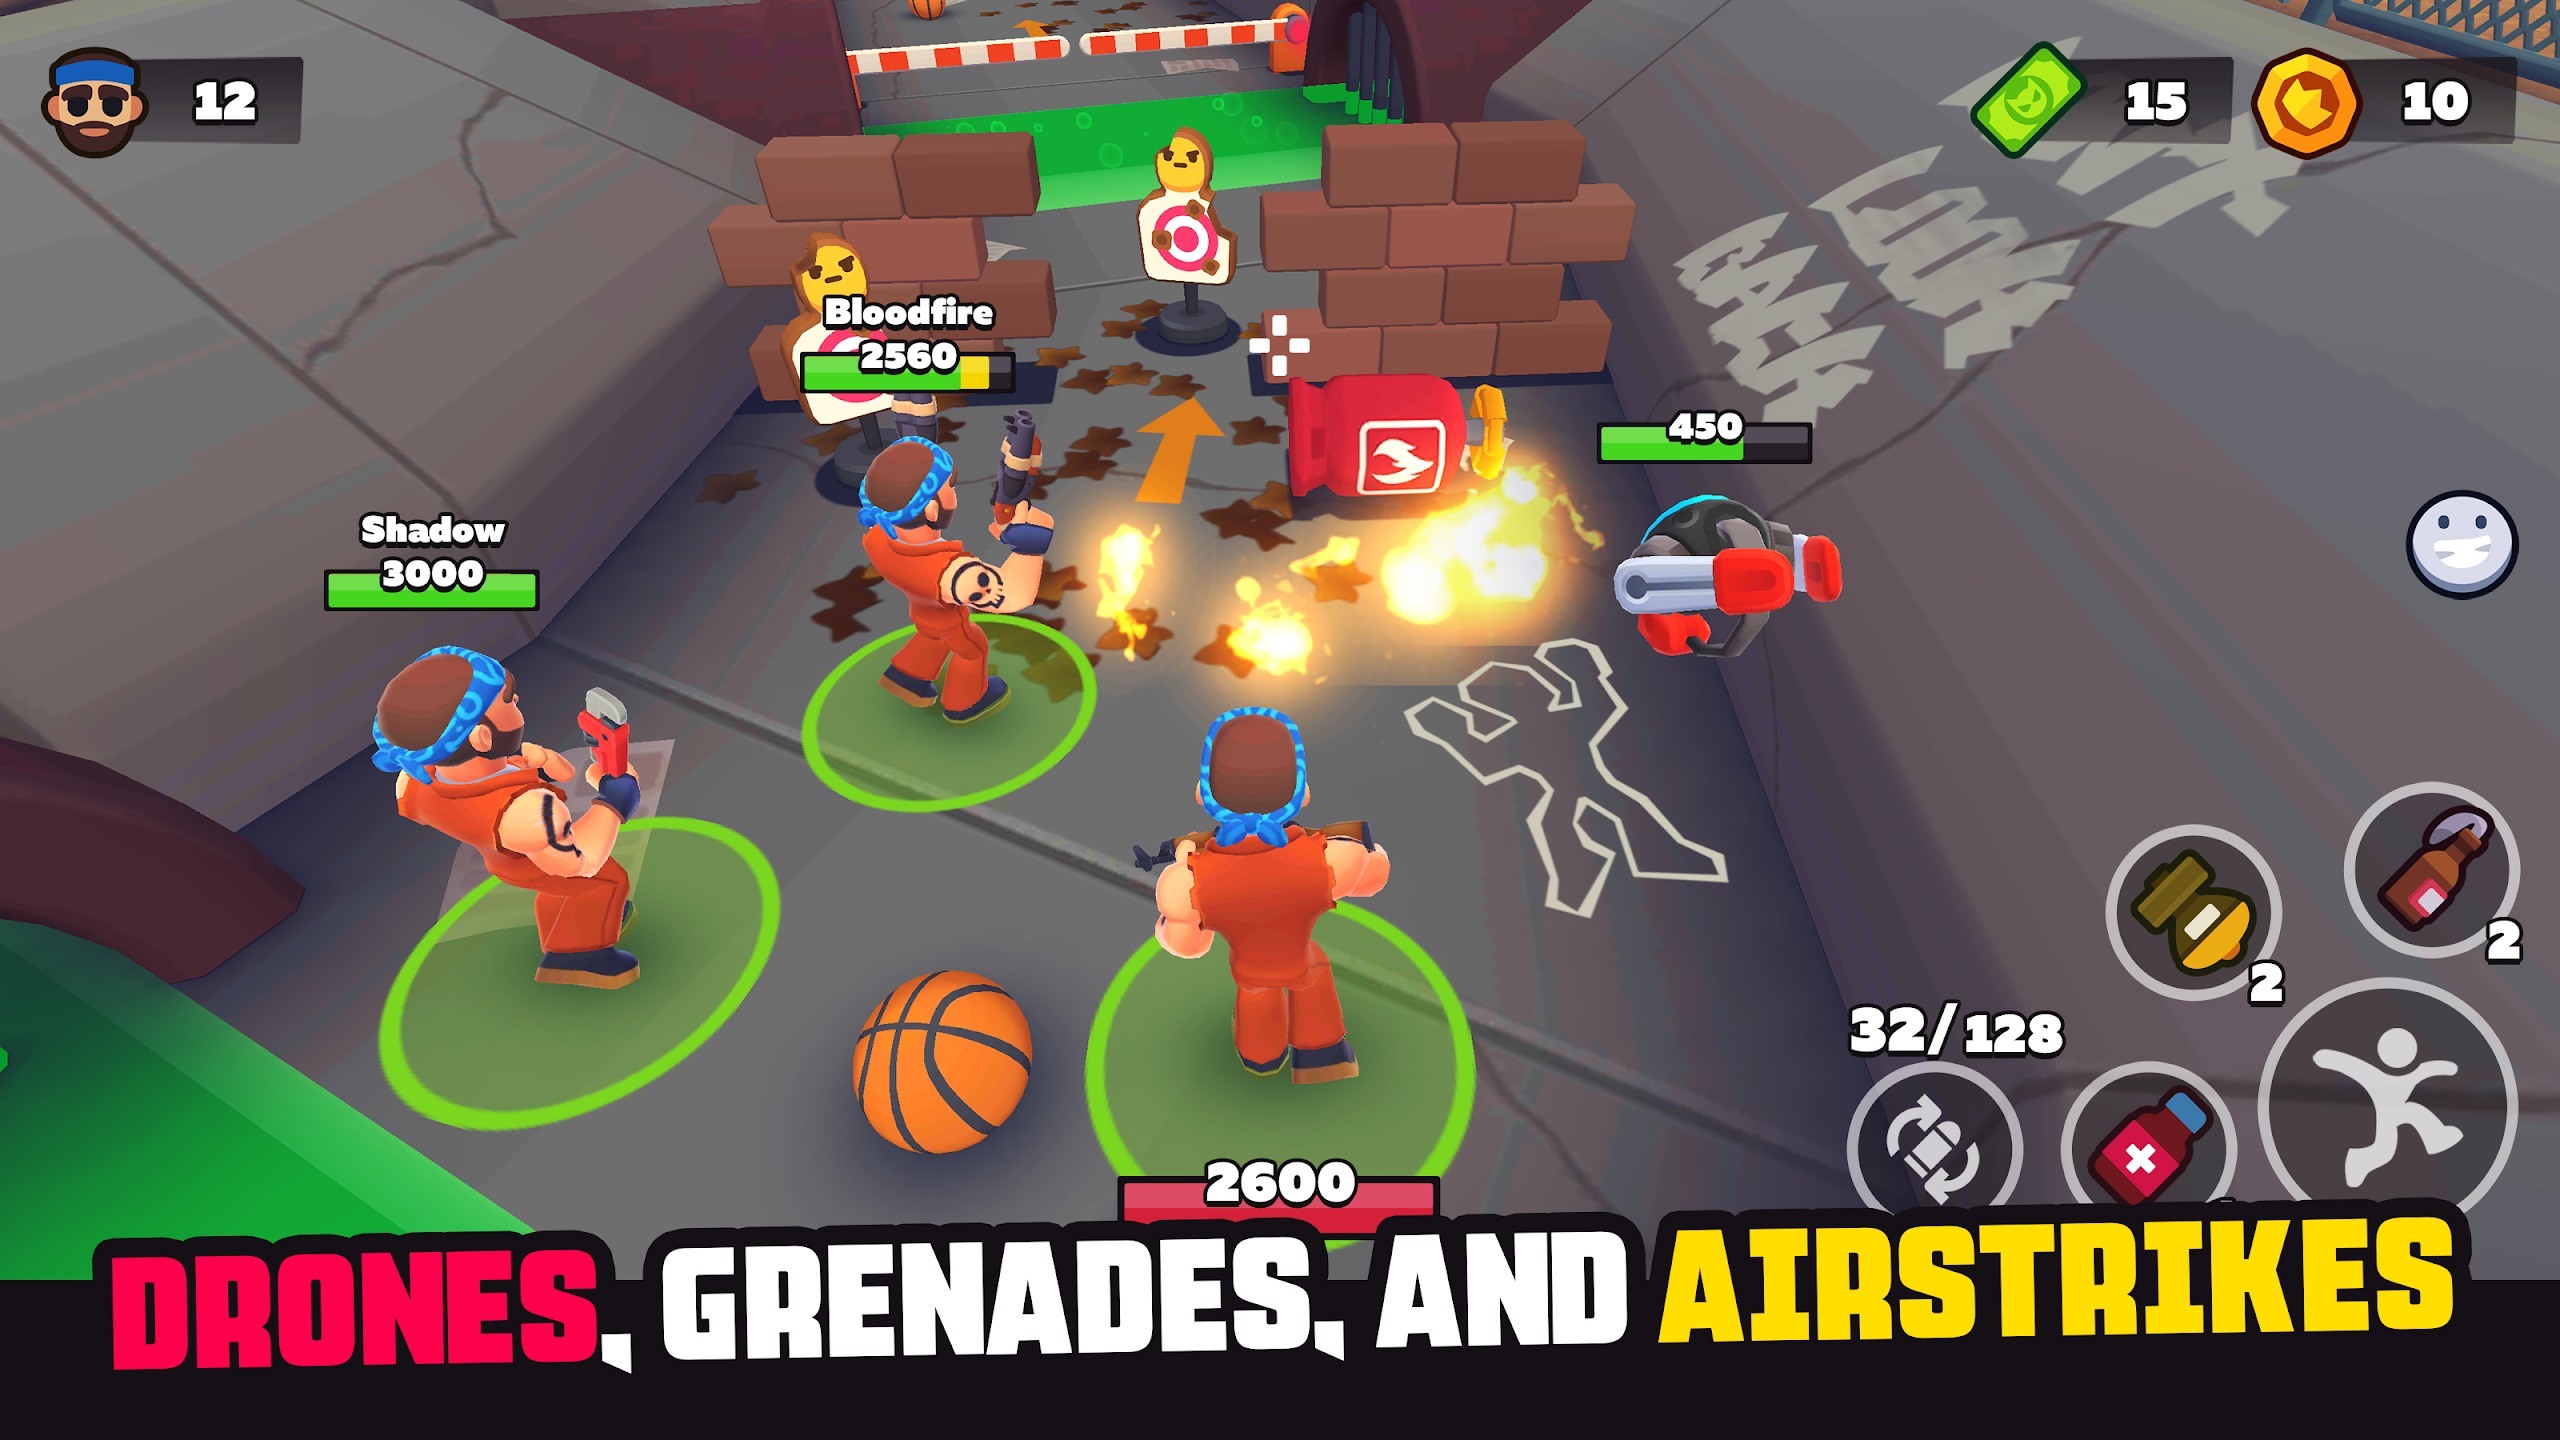 Download ZombsRoyale.io - Battle Royale android on PC